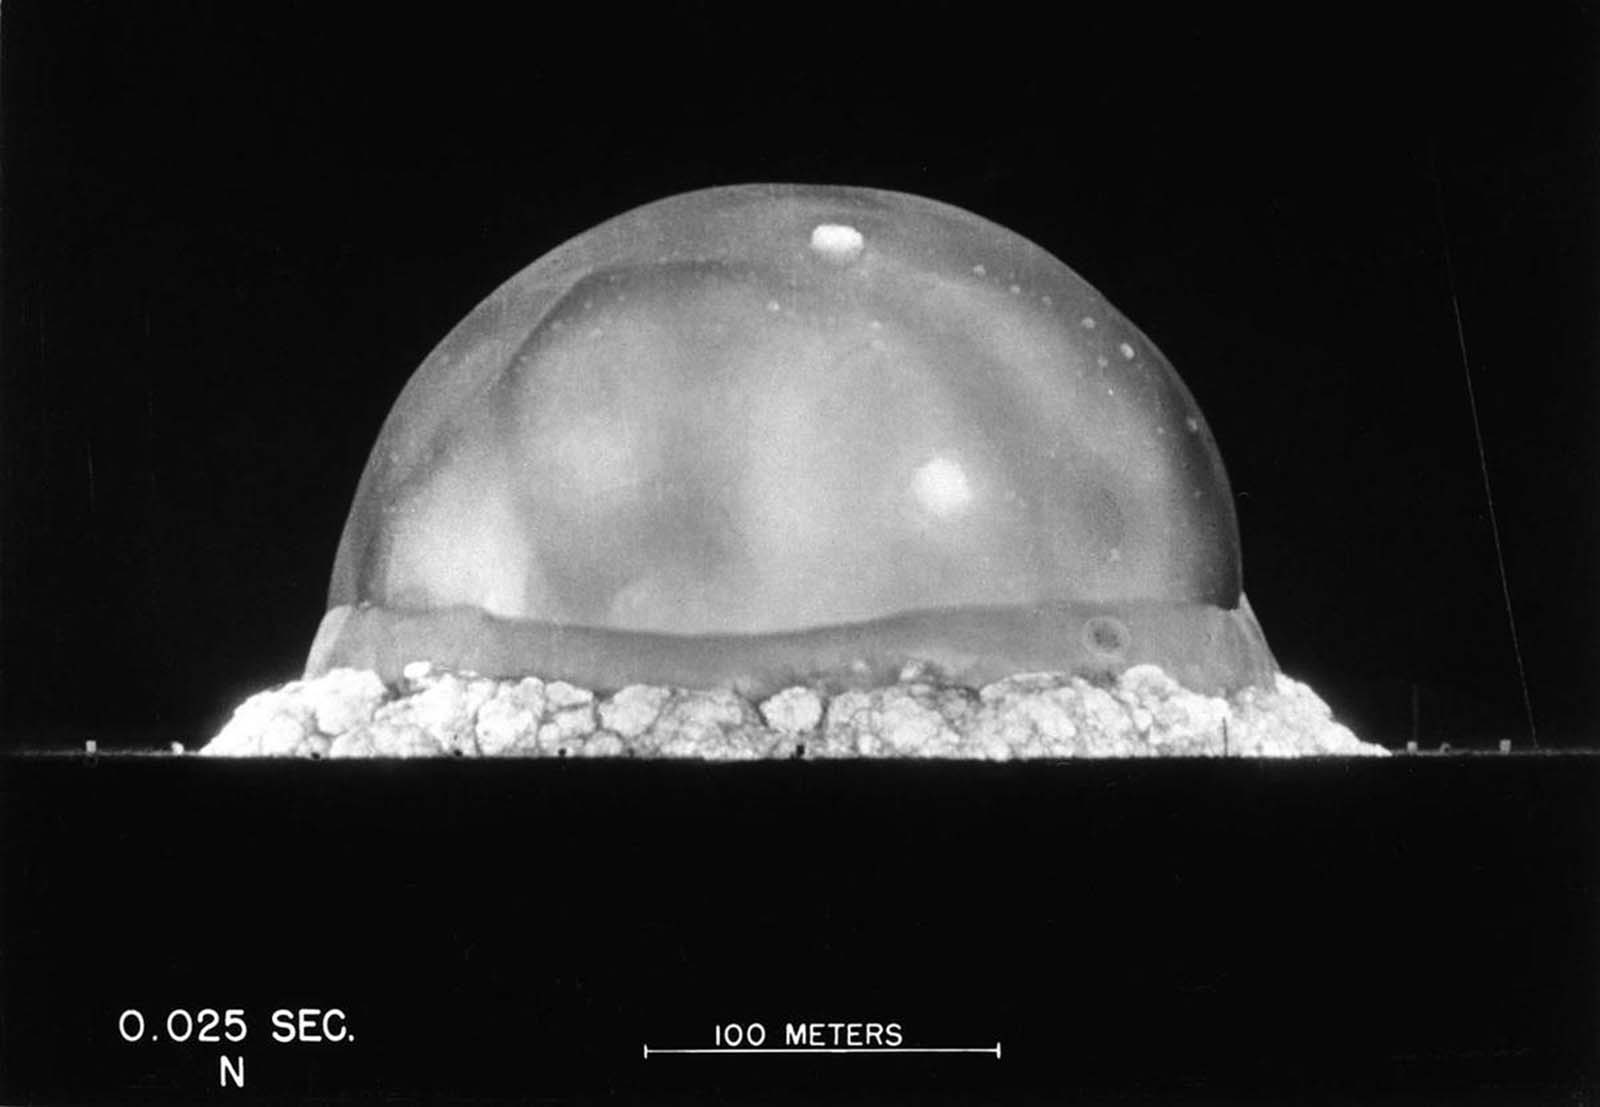 The expanding fireball and shockwave of the Trinity test explosion, seen .025 seconds after detonation in the New Mexico desert on July 16, 1945.